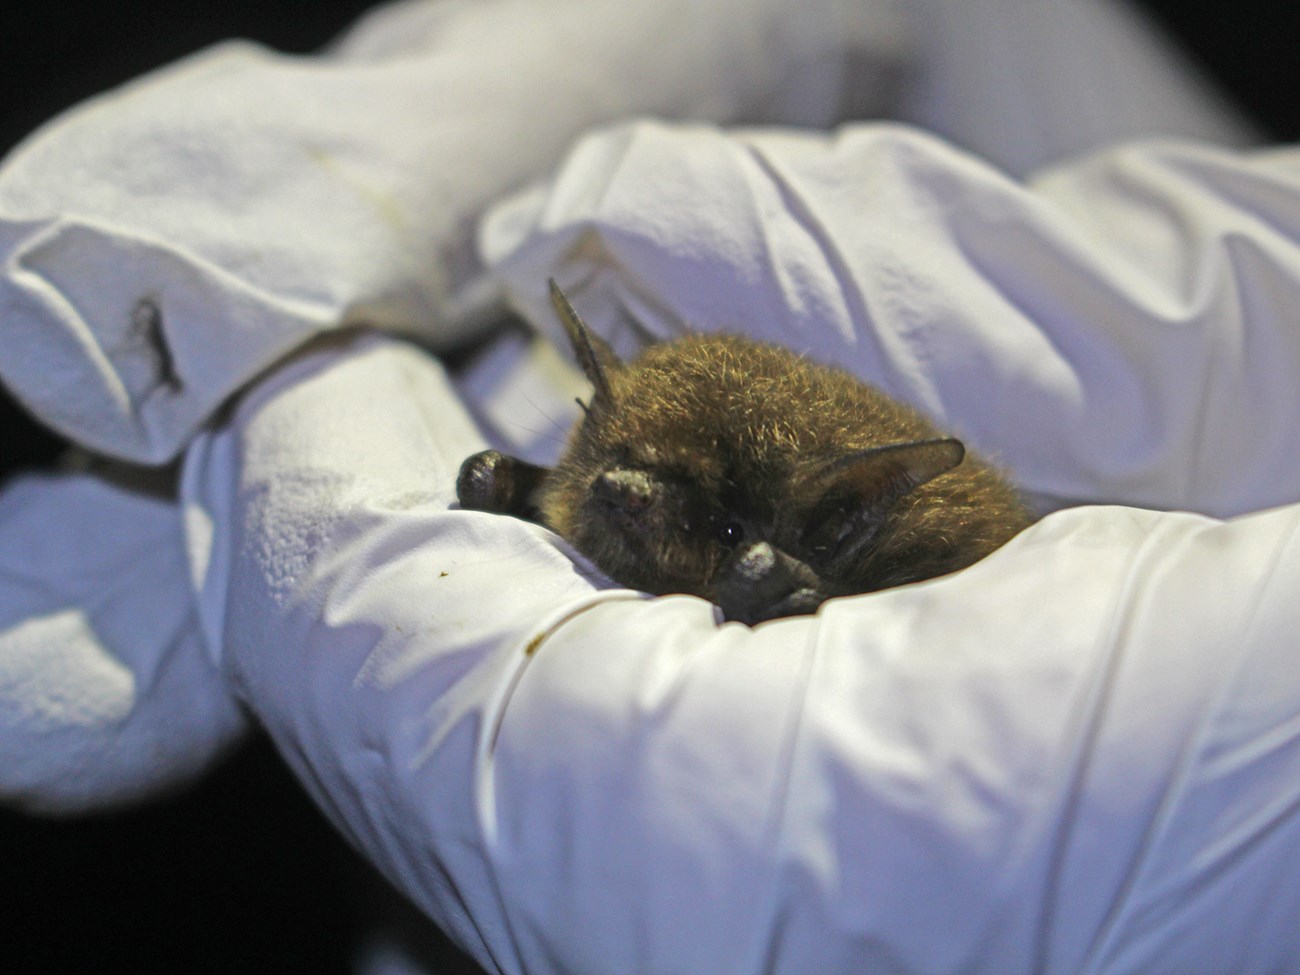 California myotis bat peeps a furry head out between the white-gloved hands of a researcher.